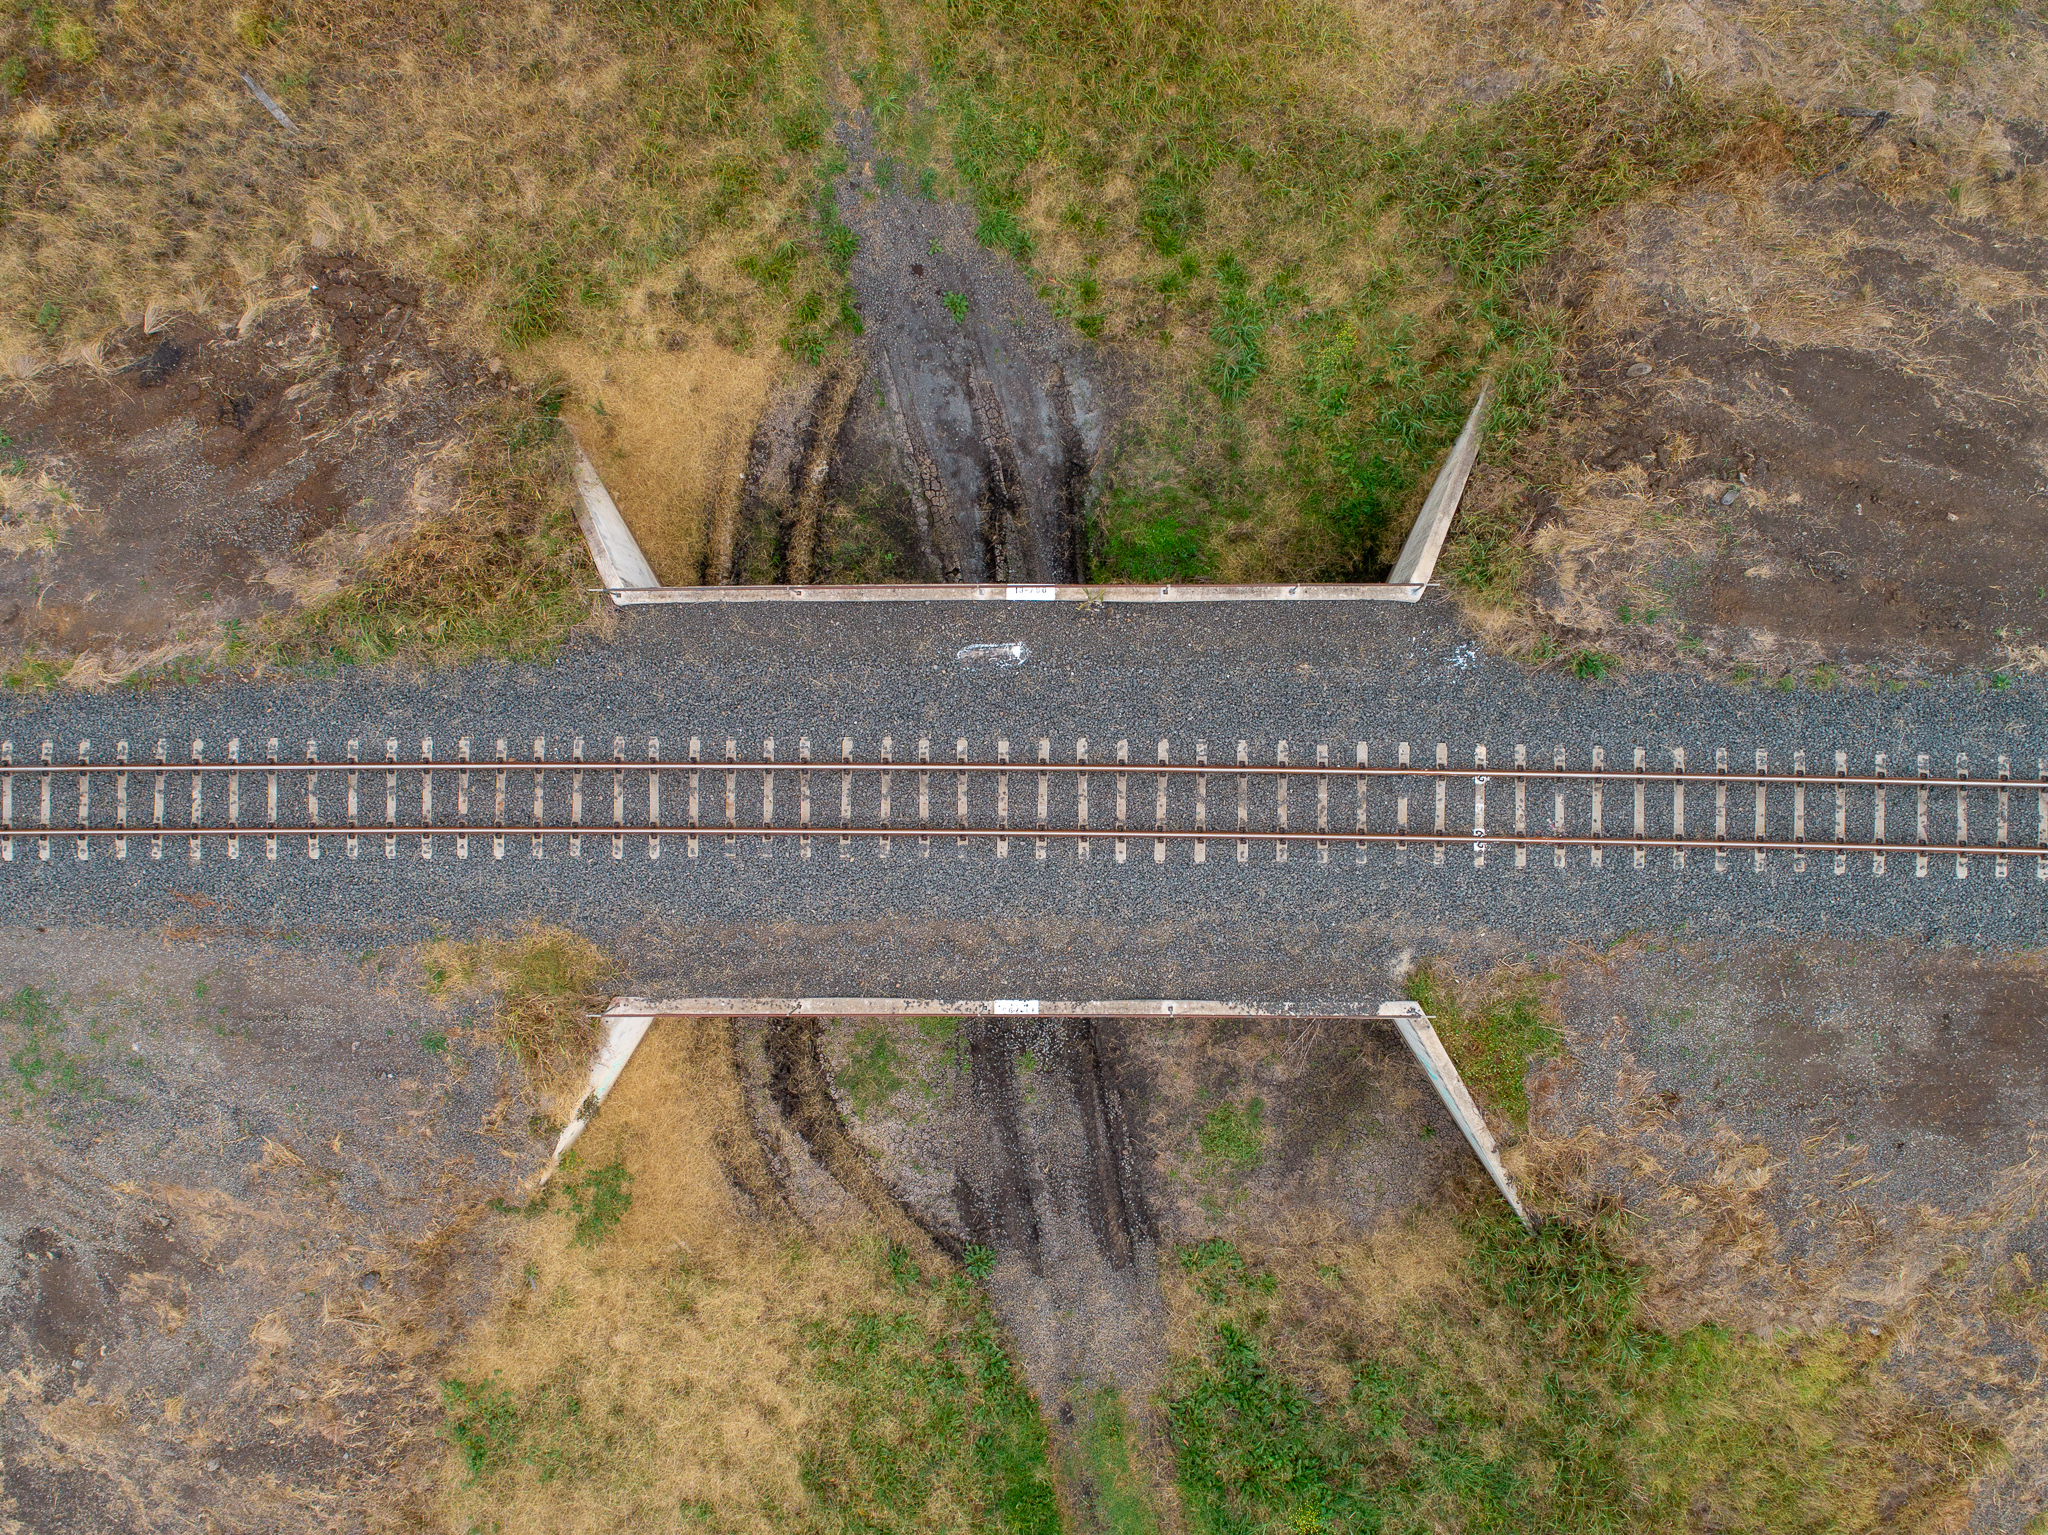 Existing rail and rail bridge at Gowrie, Queensland